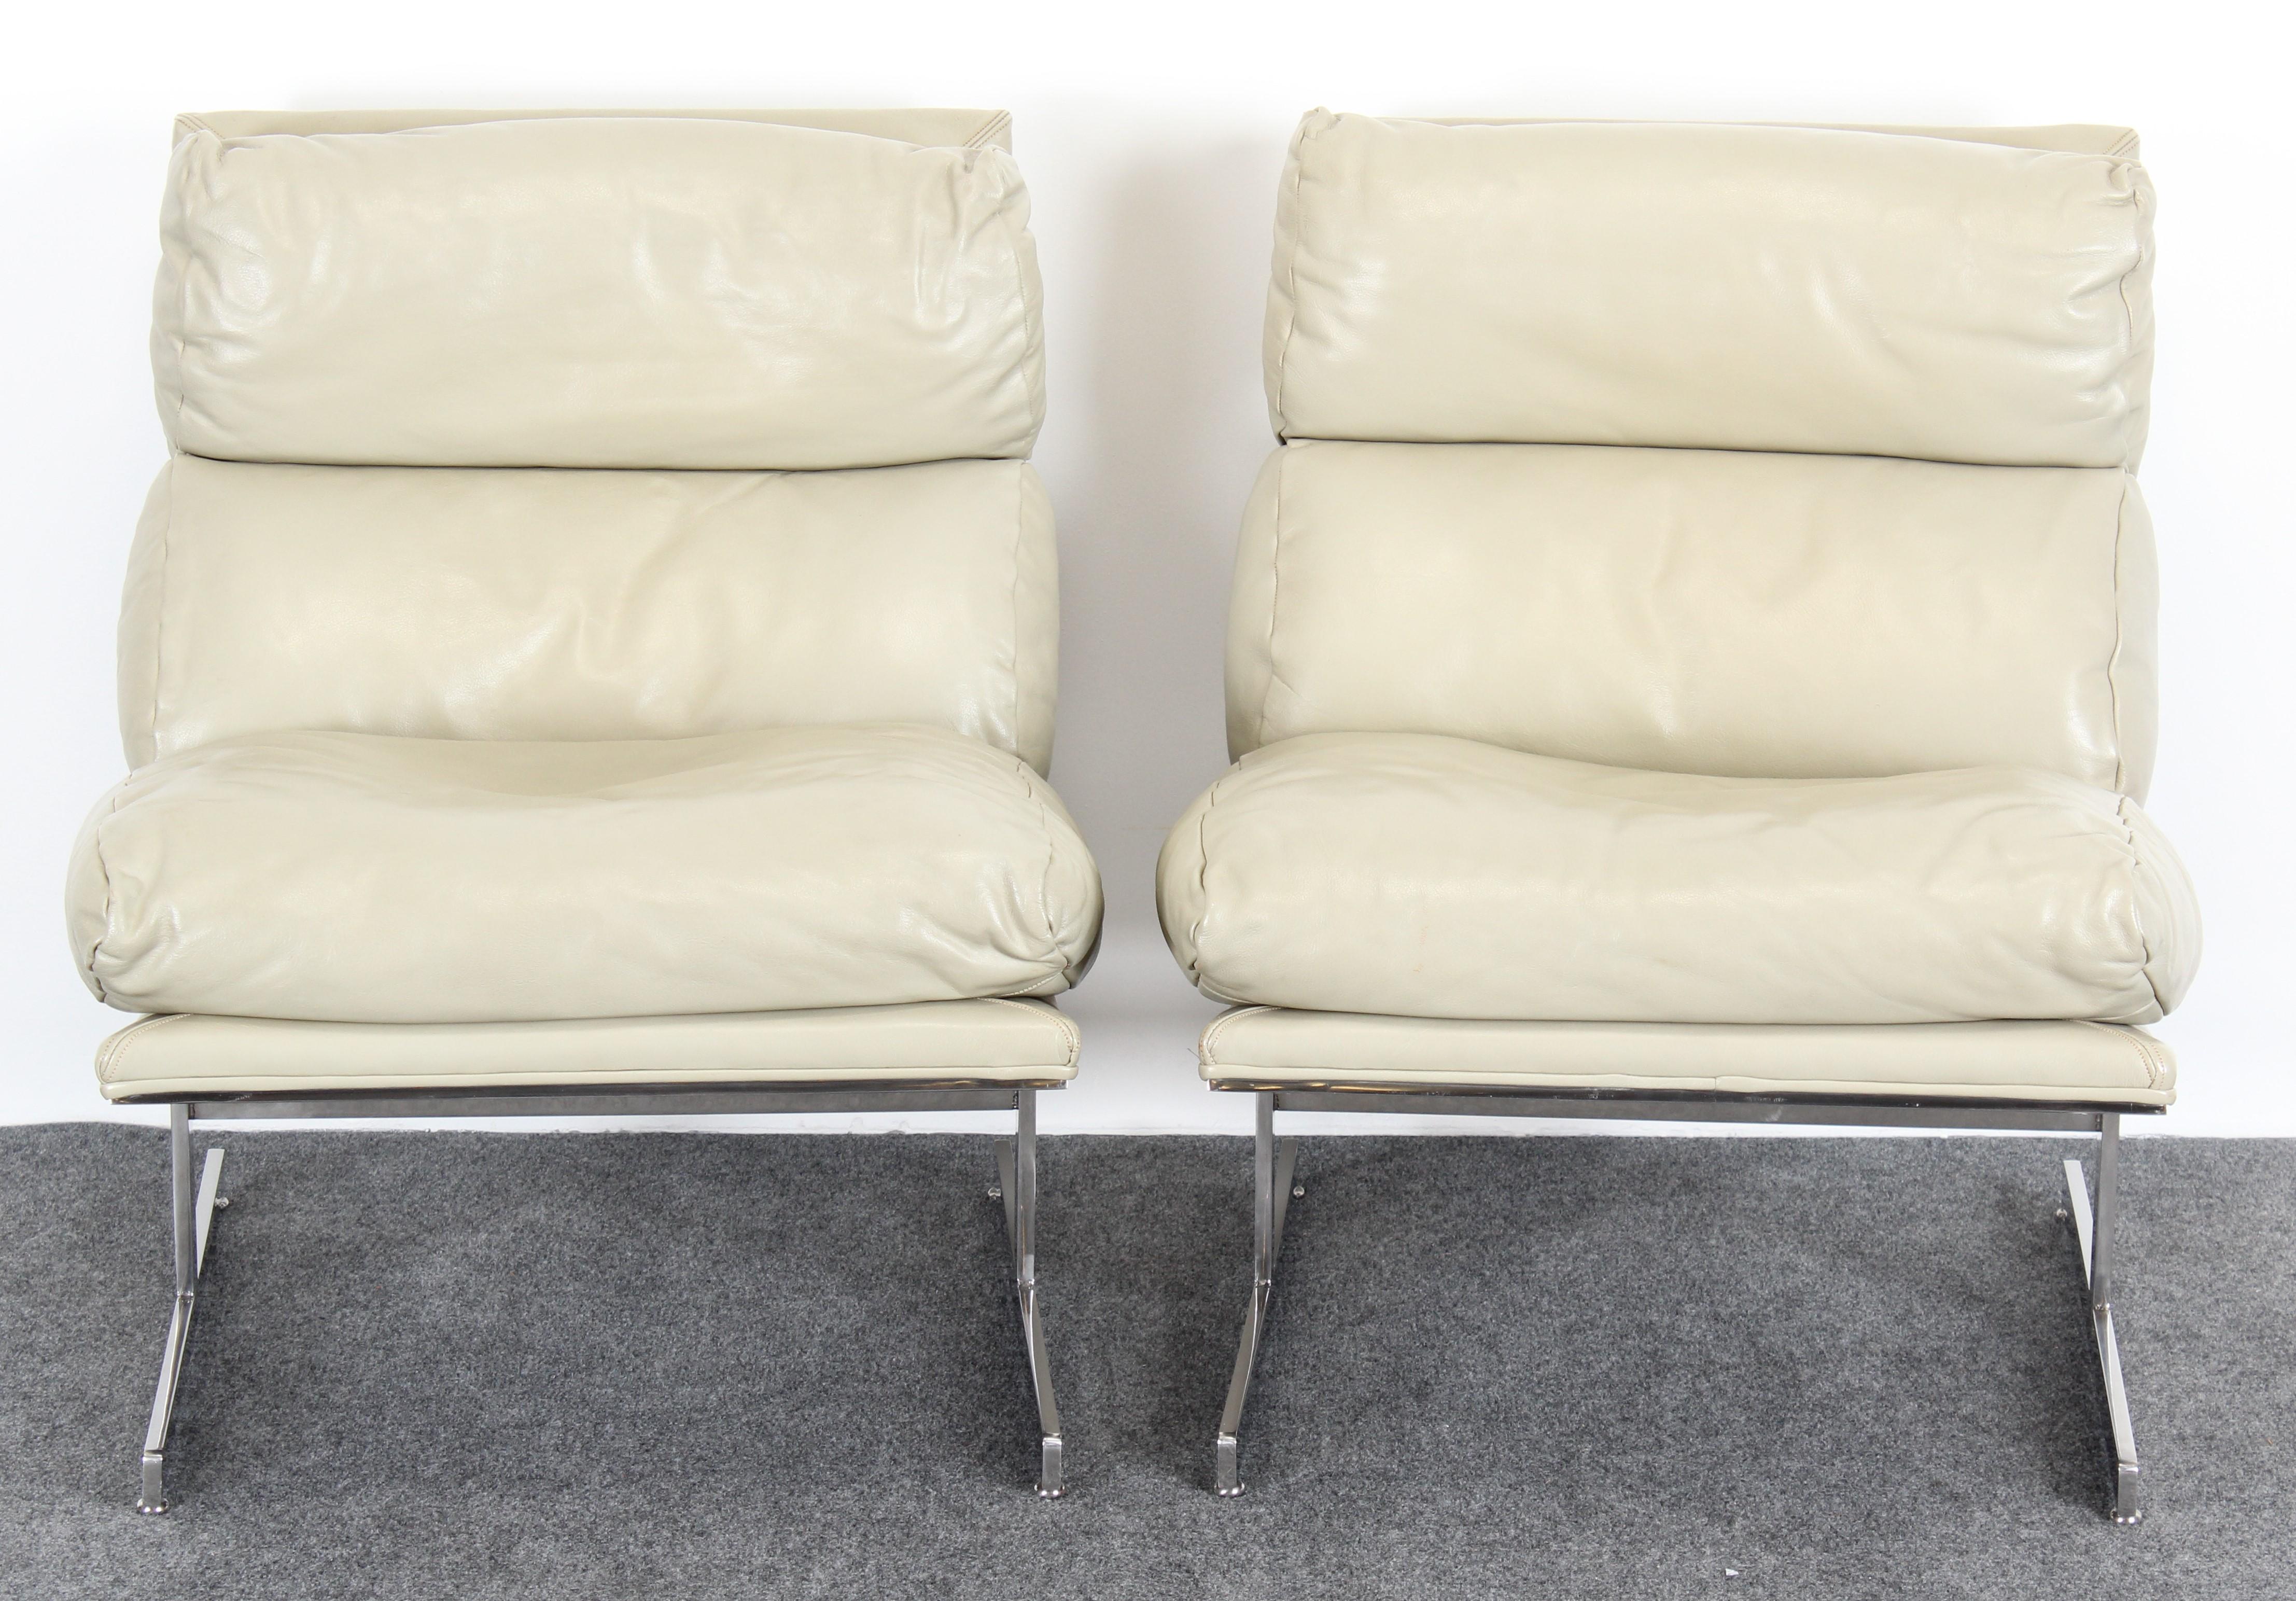 Late 20th Century Pair of Kipp Stewart Stainless Steel Lounge Chairs for Directional, 1970s